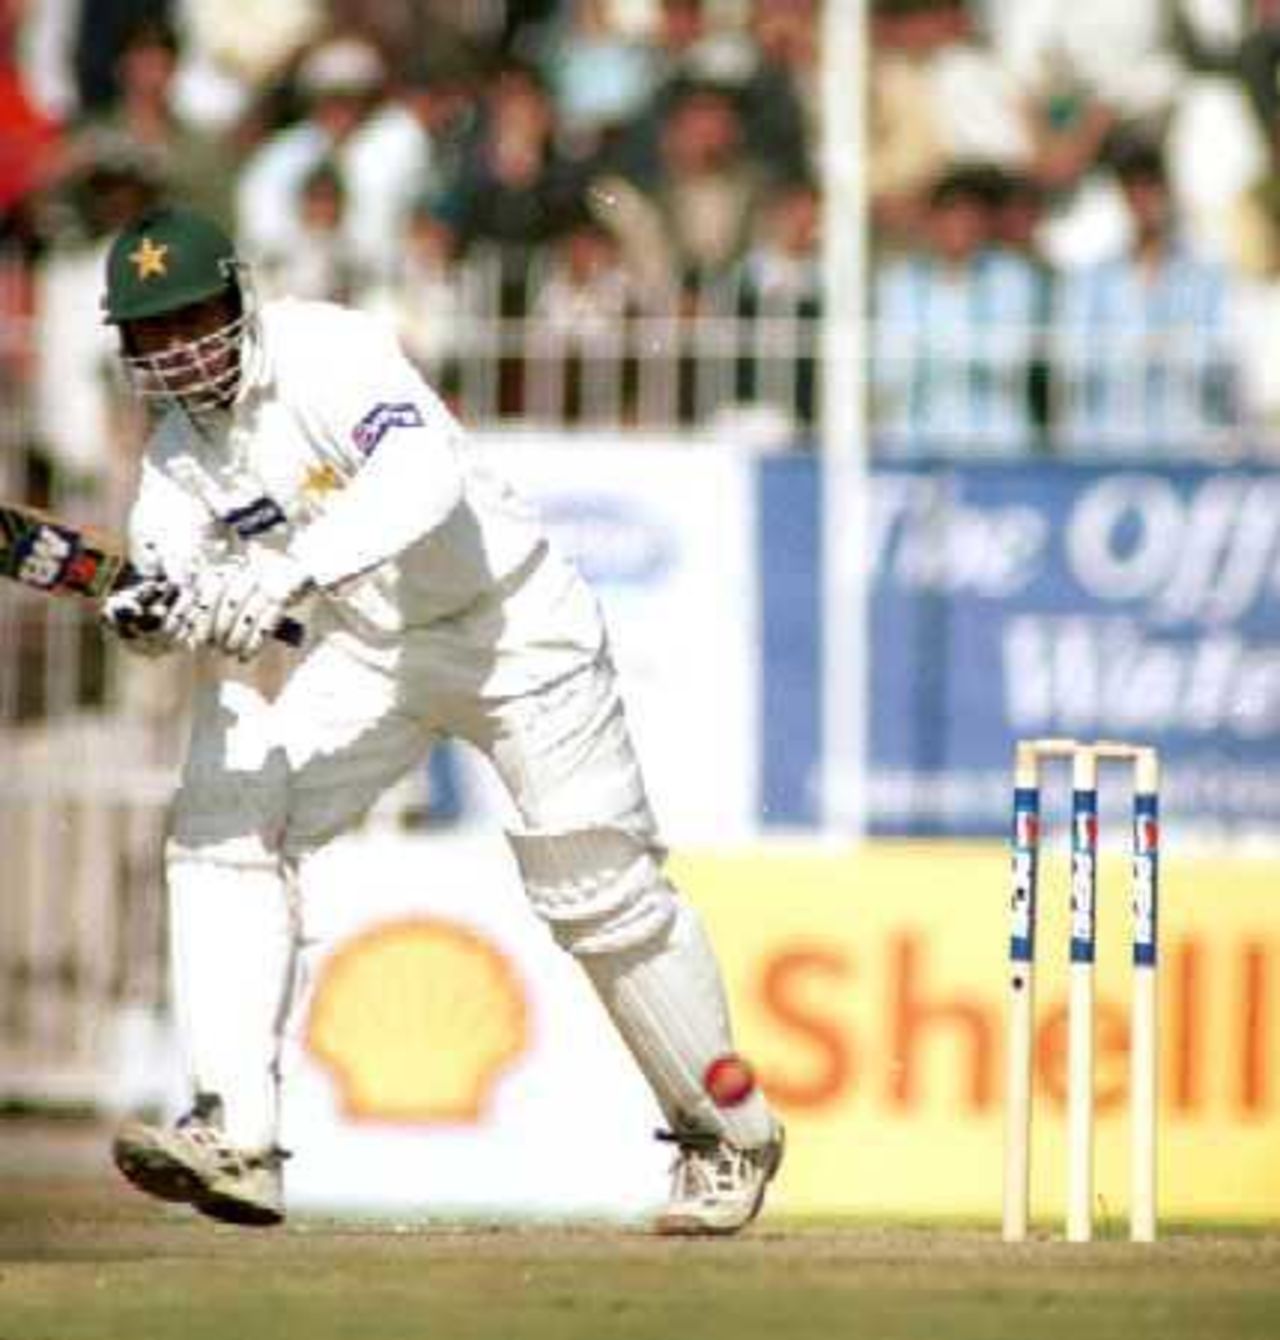 Saleem Elahi off for a single after playing an on-drive, Day 1, 2nd Test Match, Pakistan v England at Faisalabad, 29 Nov-3 Dec 2000.